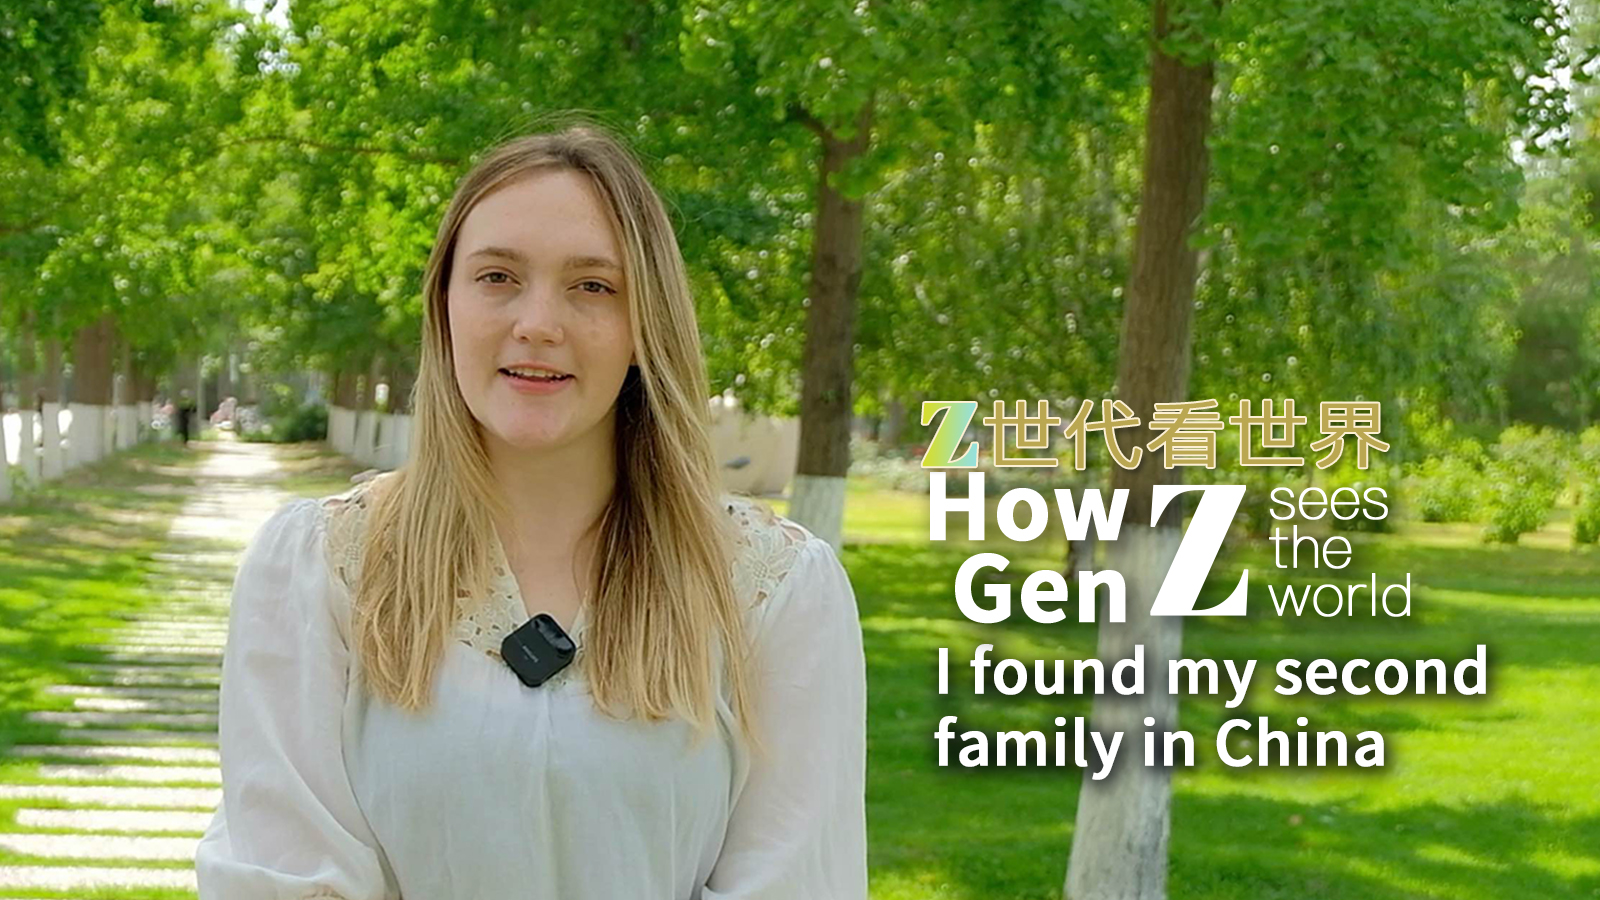 How Gen Z sees the world: I found my second family in China